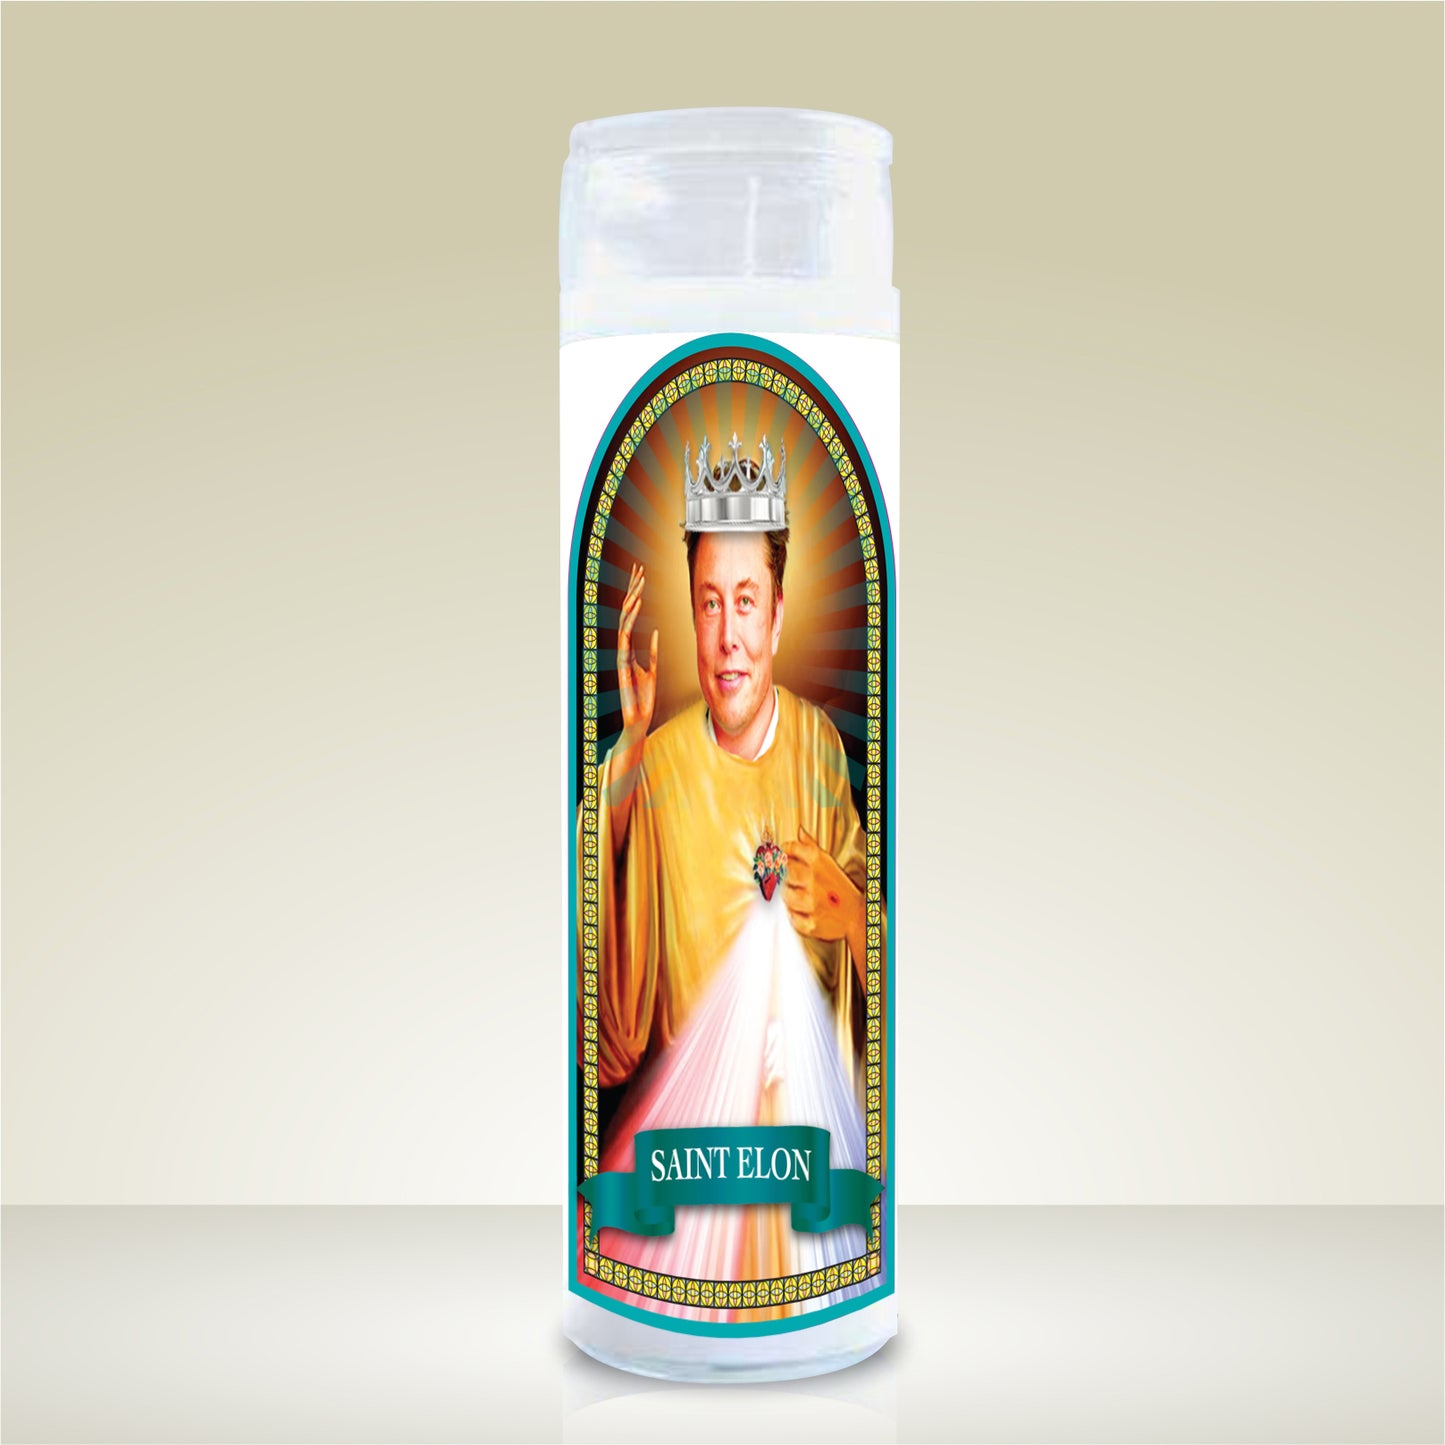 Elon Musk Celebrity Prayer Candle. Buy 1 Design, Get Another 1/2 Price